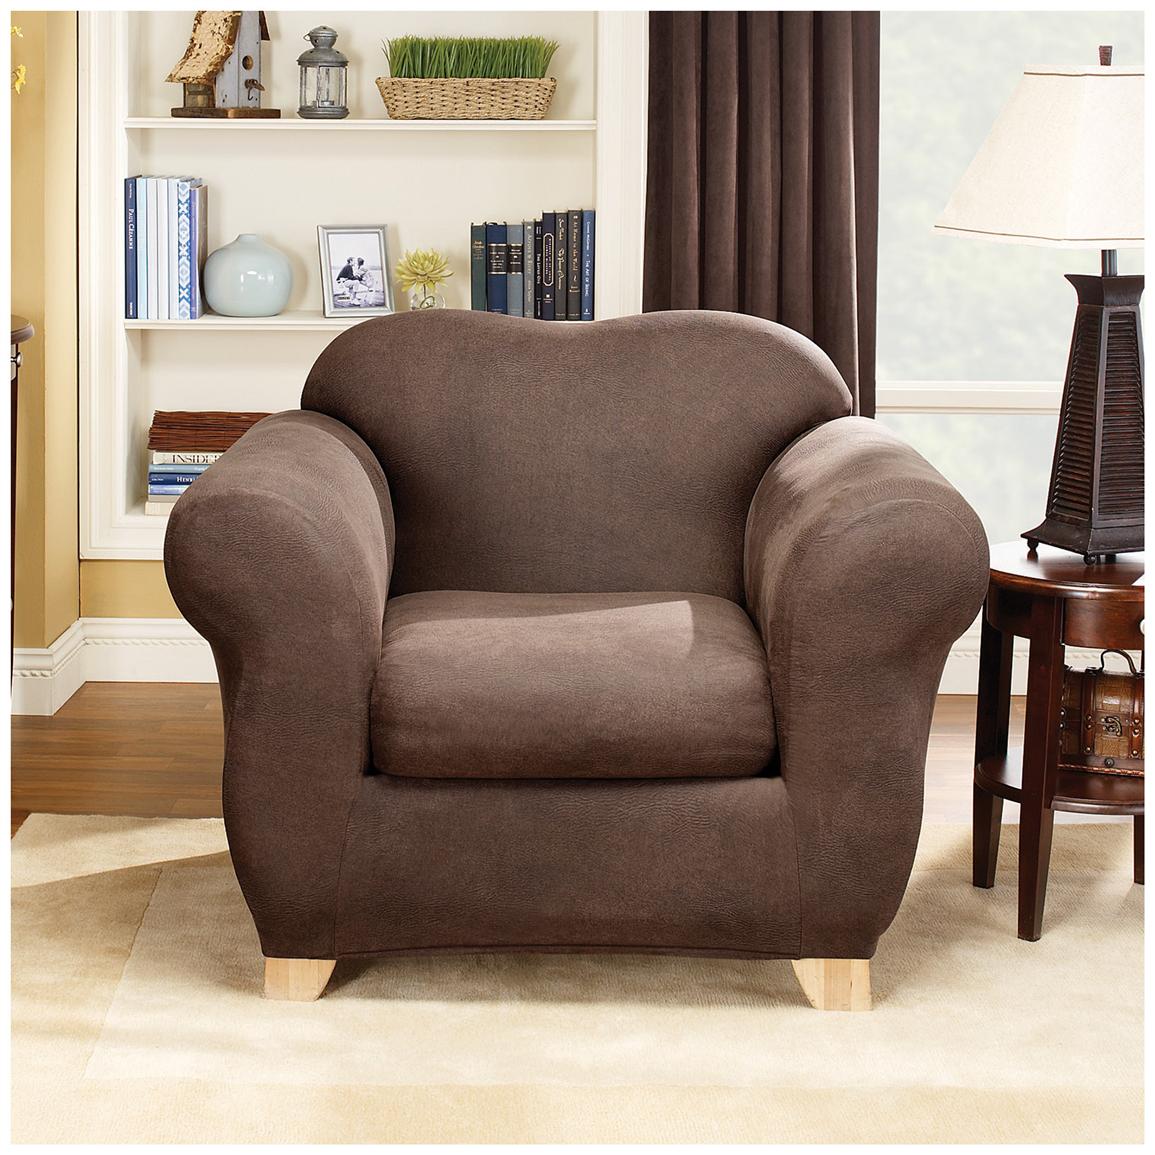 Modern Leather Chair Covers Wholesale with Simple Decor